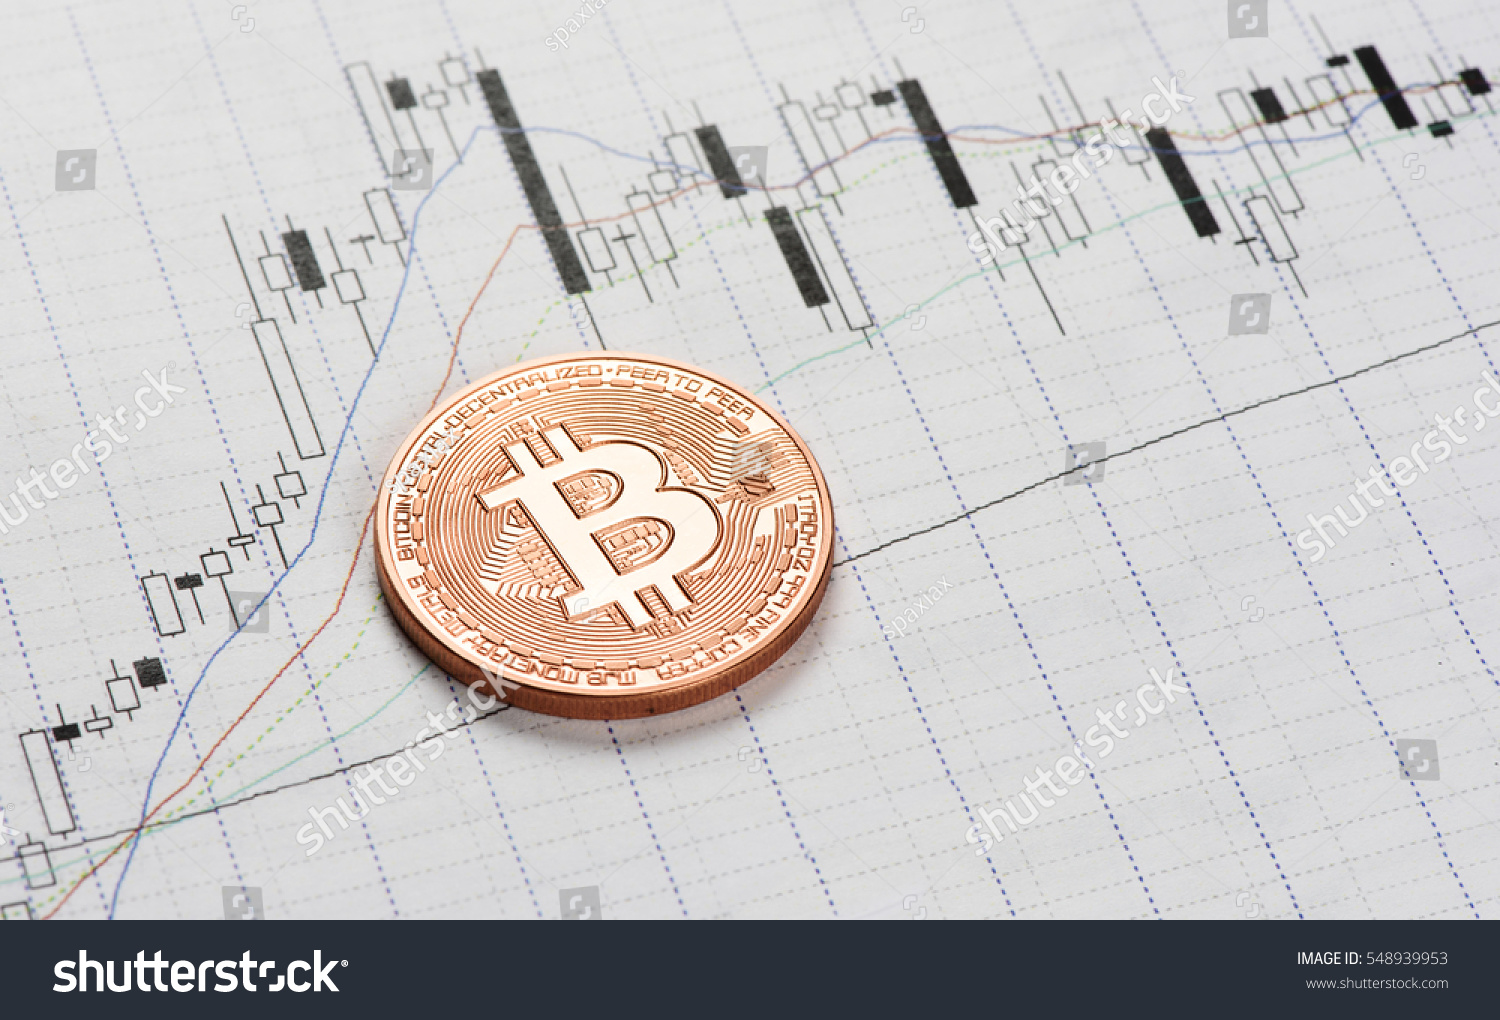 Cryptocurrency Bitcoin Coin On Stock Market Stock Photo ...